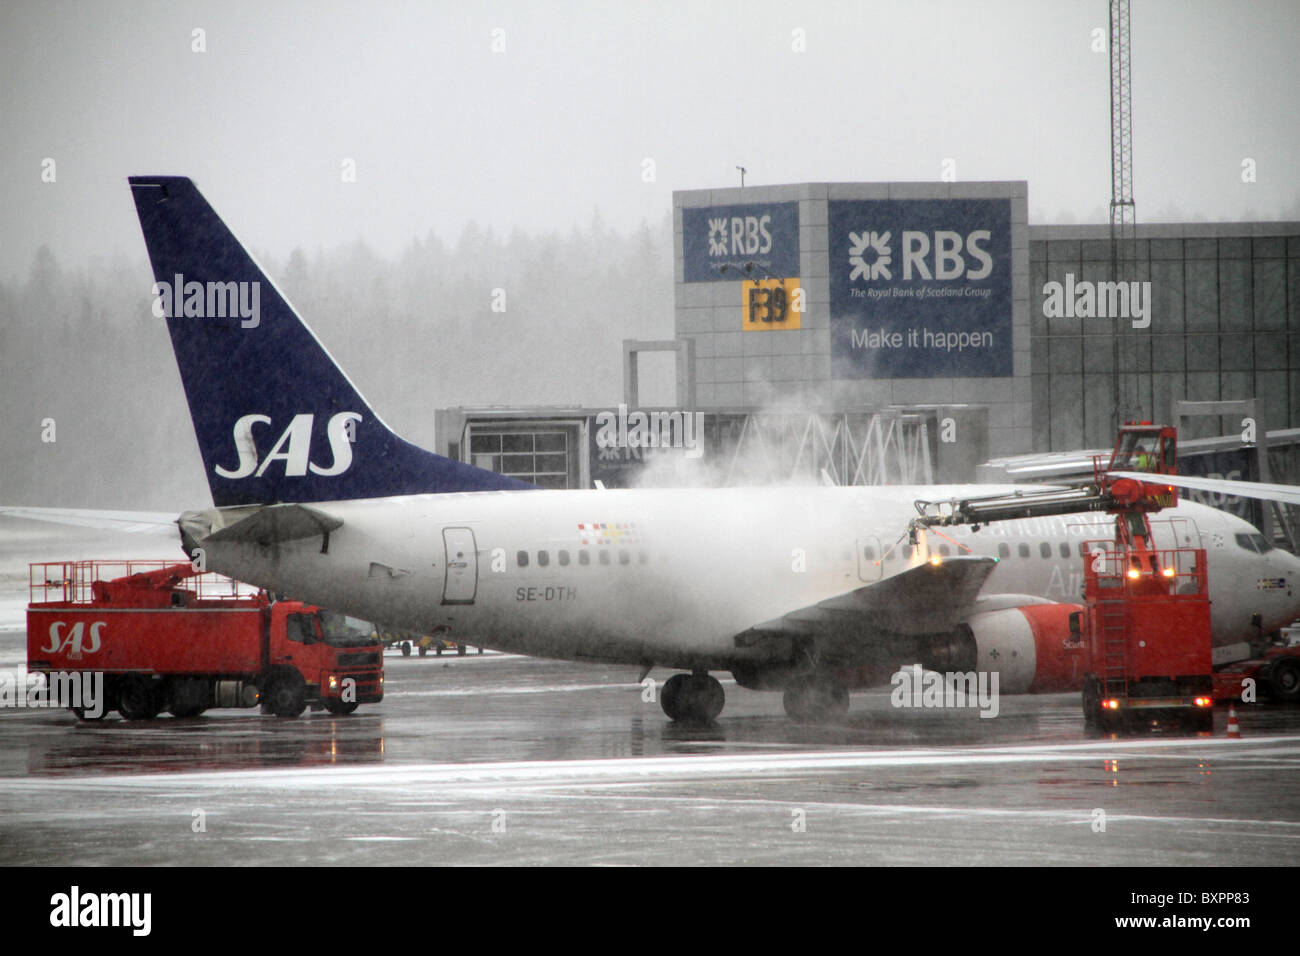 Arlanda Airport, Stockholm, Sweden. An SAS plane is de-iced on the tarmac  at a snow bound and foggy day at Arlanda Airport Stock Photo - Alamy